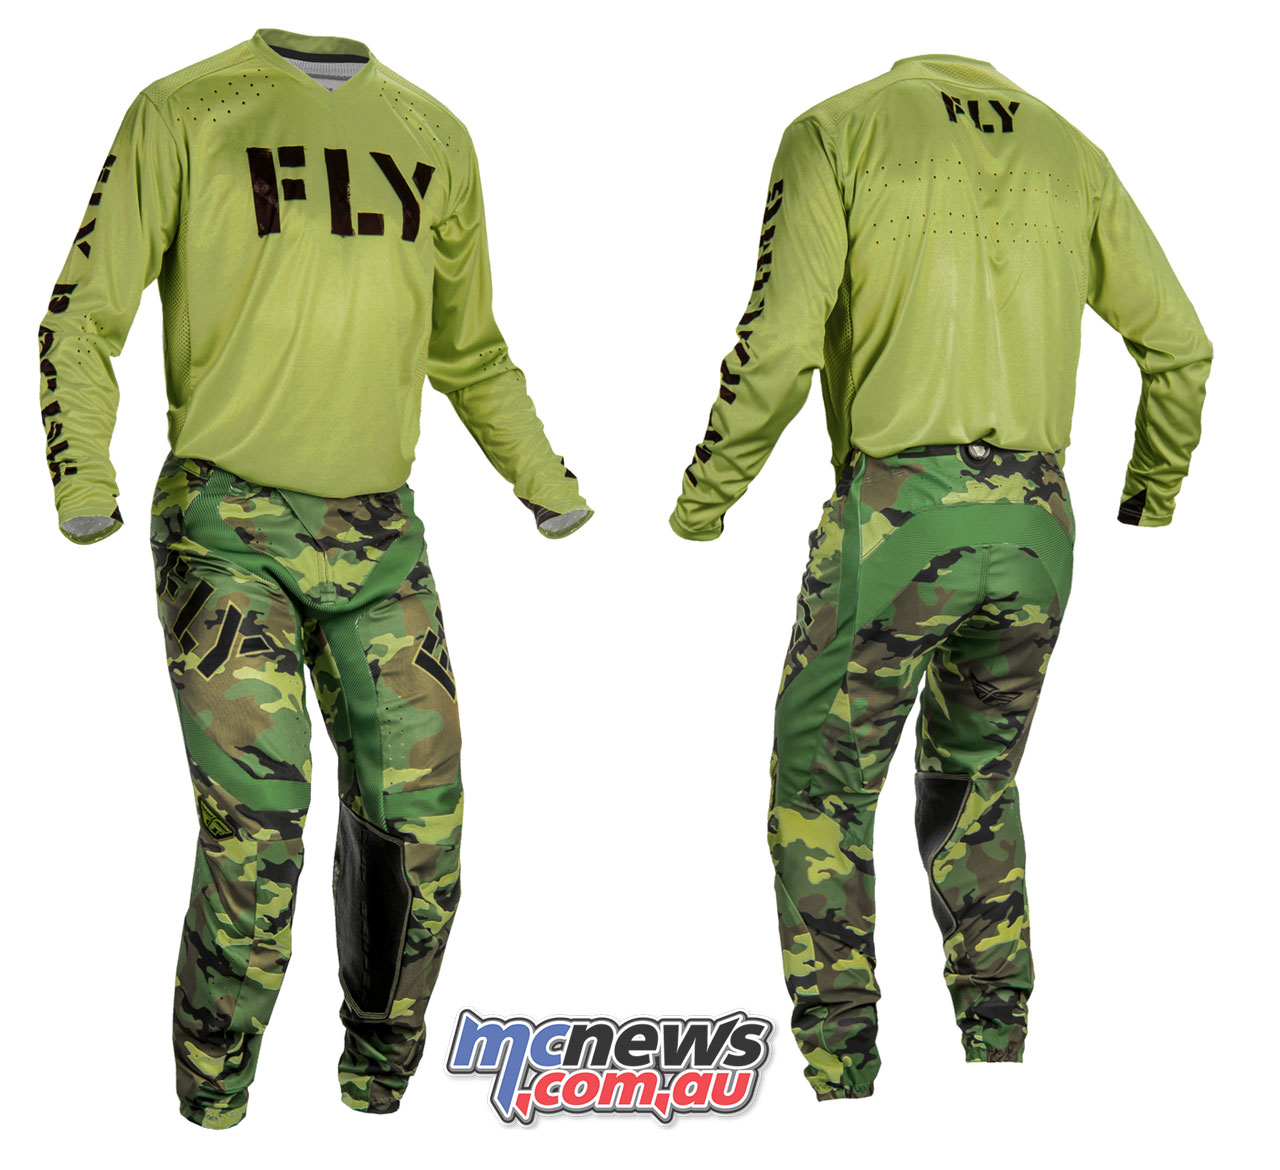 NEW FLY RACING LIMITED EDITION LITE CAMO PANTS MOTORCYCLE ATV MX BMX